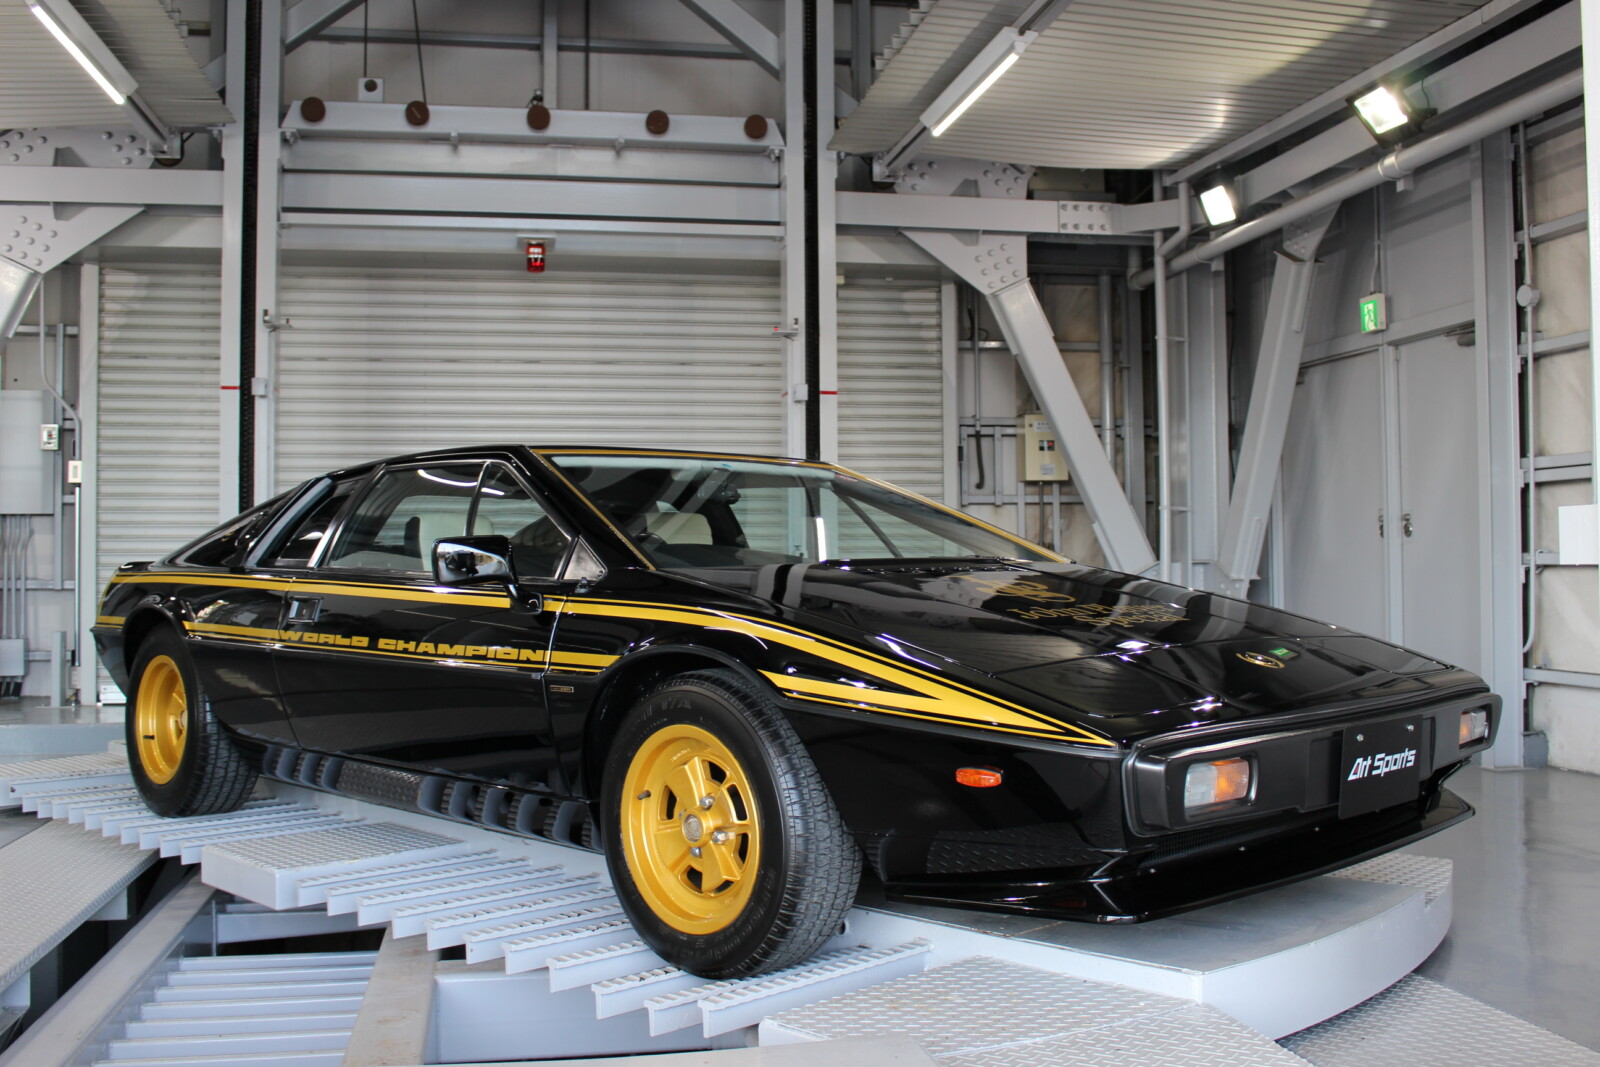 LOTUS ESPRIT S2 John Playe Special Limited Edition | ART SPORTS